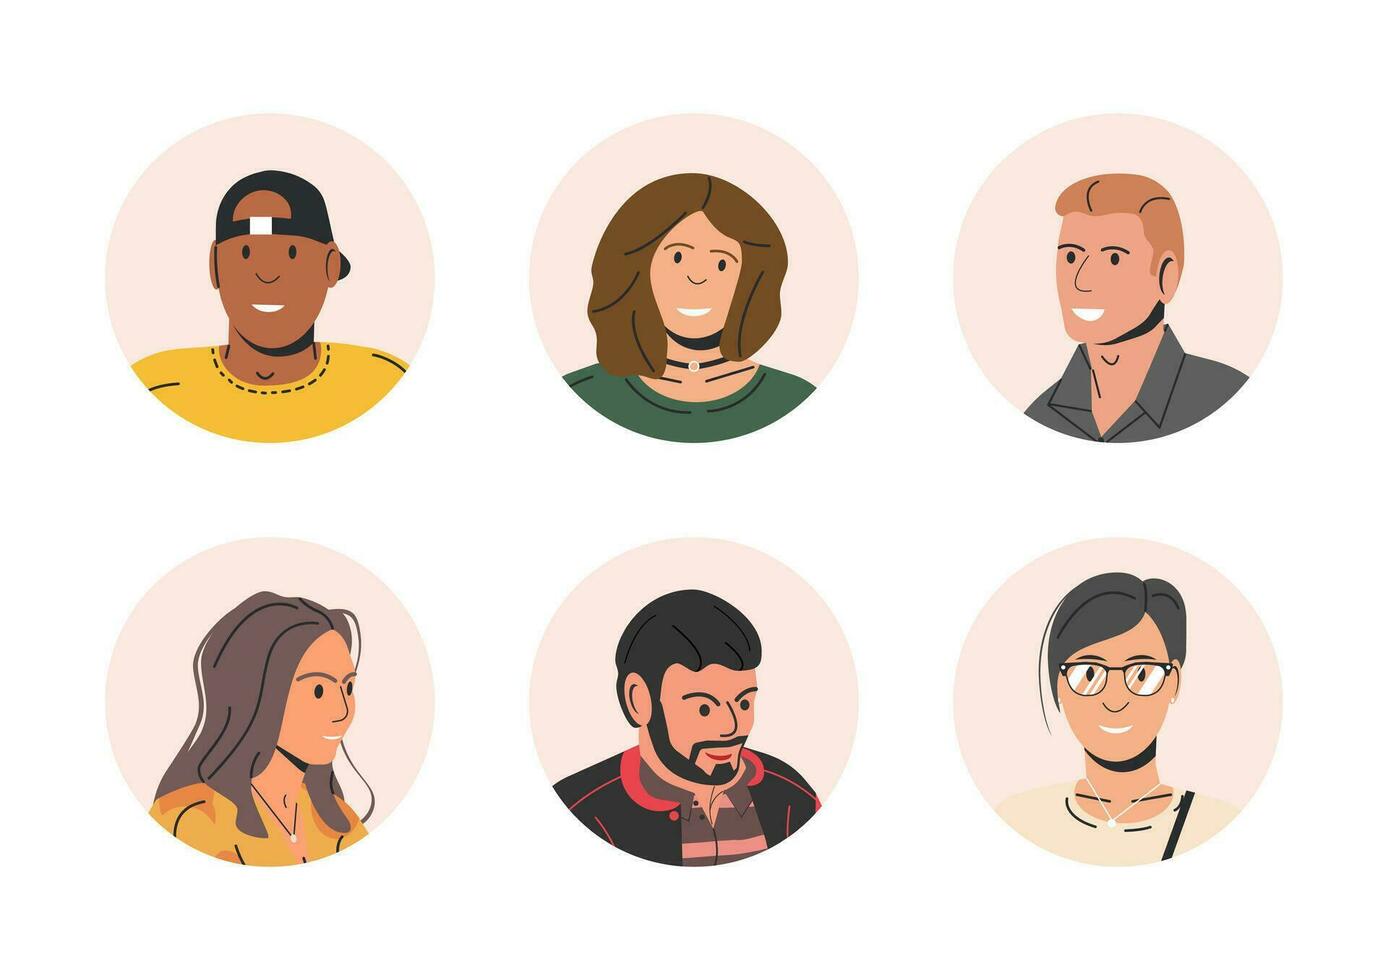 Different People Avatars. Set of Circle User Portraits. Male and Female Characters. Man and Woman in Trendy Outfit. Guys and Girls with Different Hairstyles and Ethnicities. Flat Vector Illustration